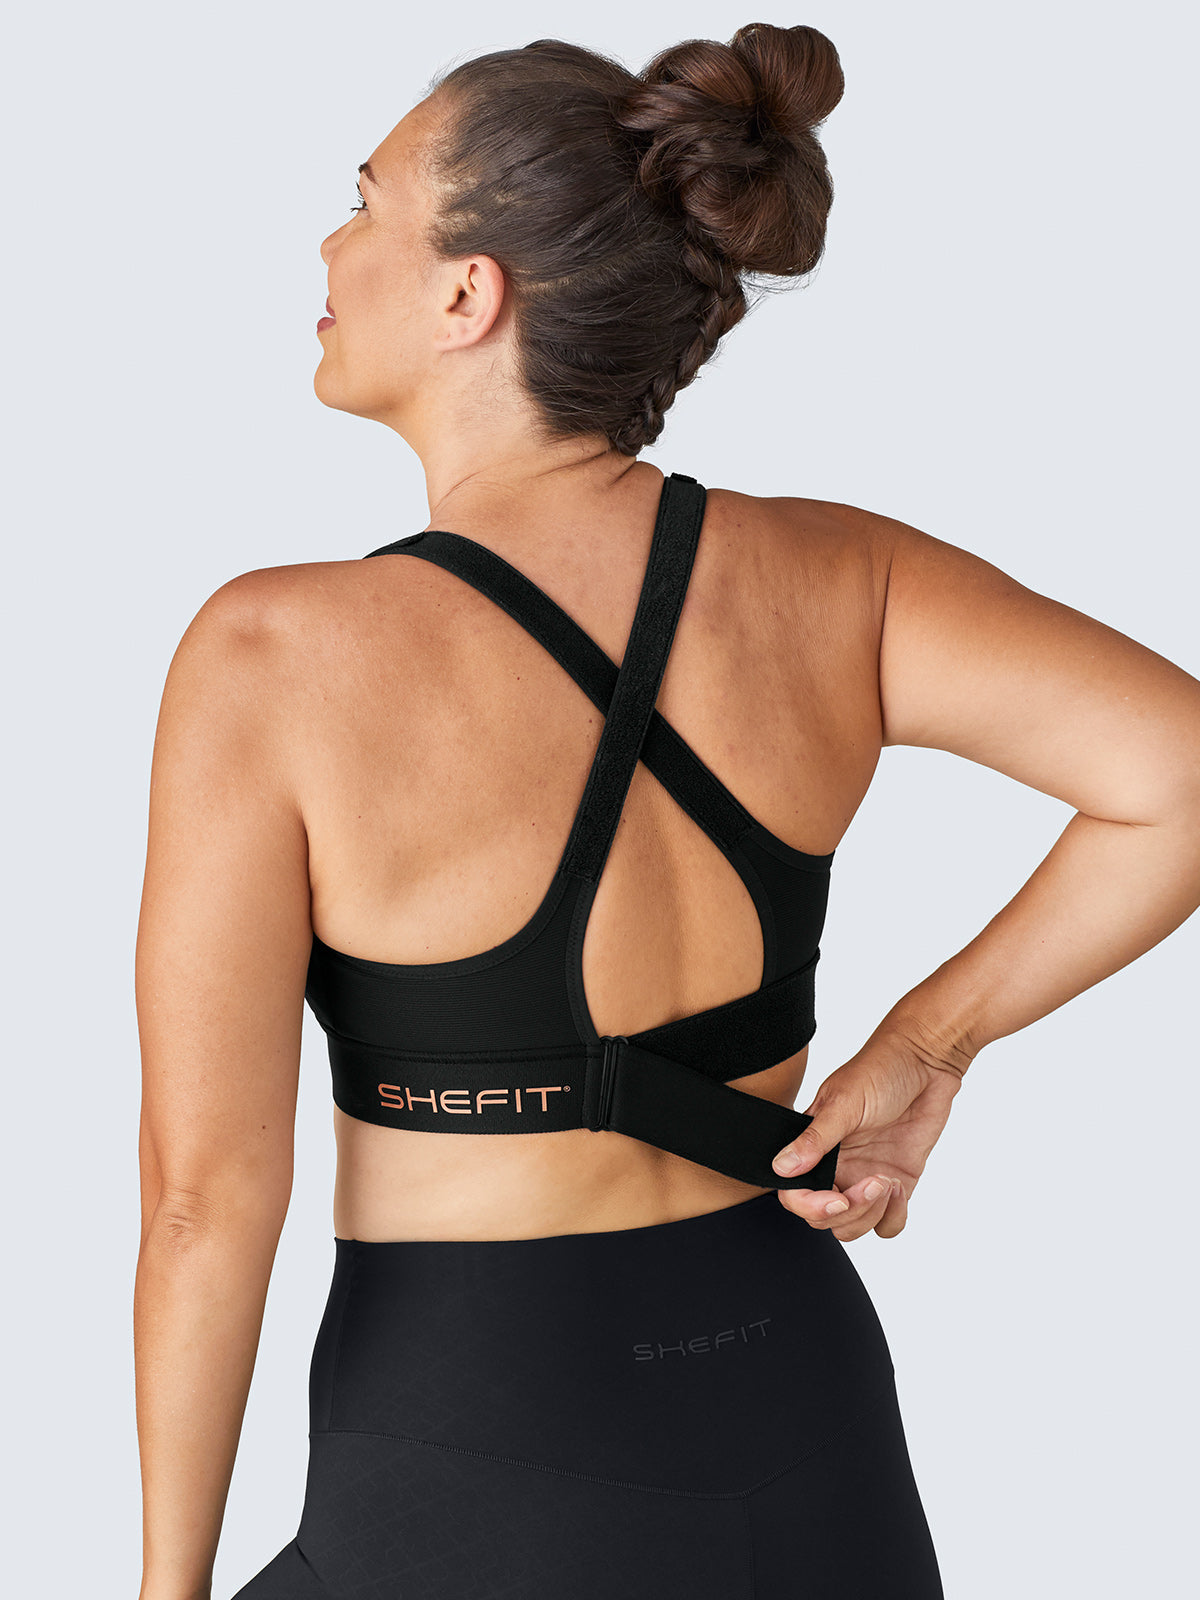 OUMSHBI Sports Bra Stretch Band Fully Adjustable Comfortable Cup